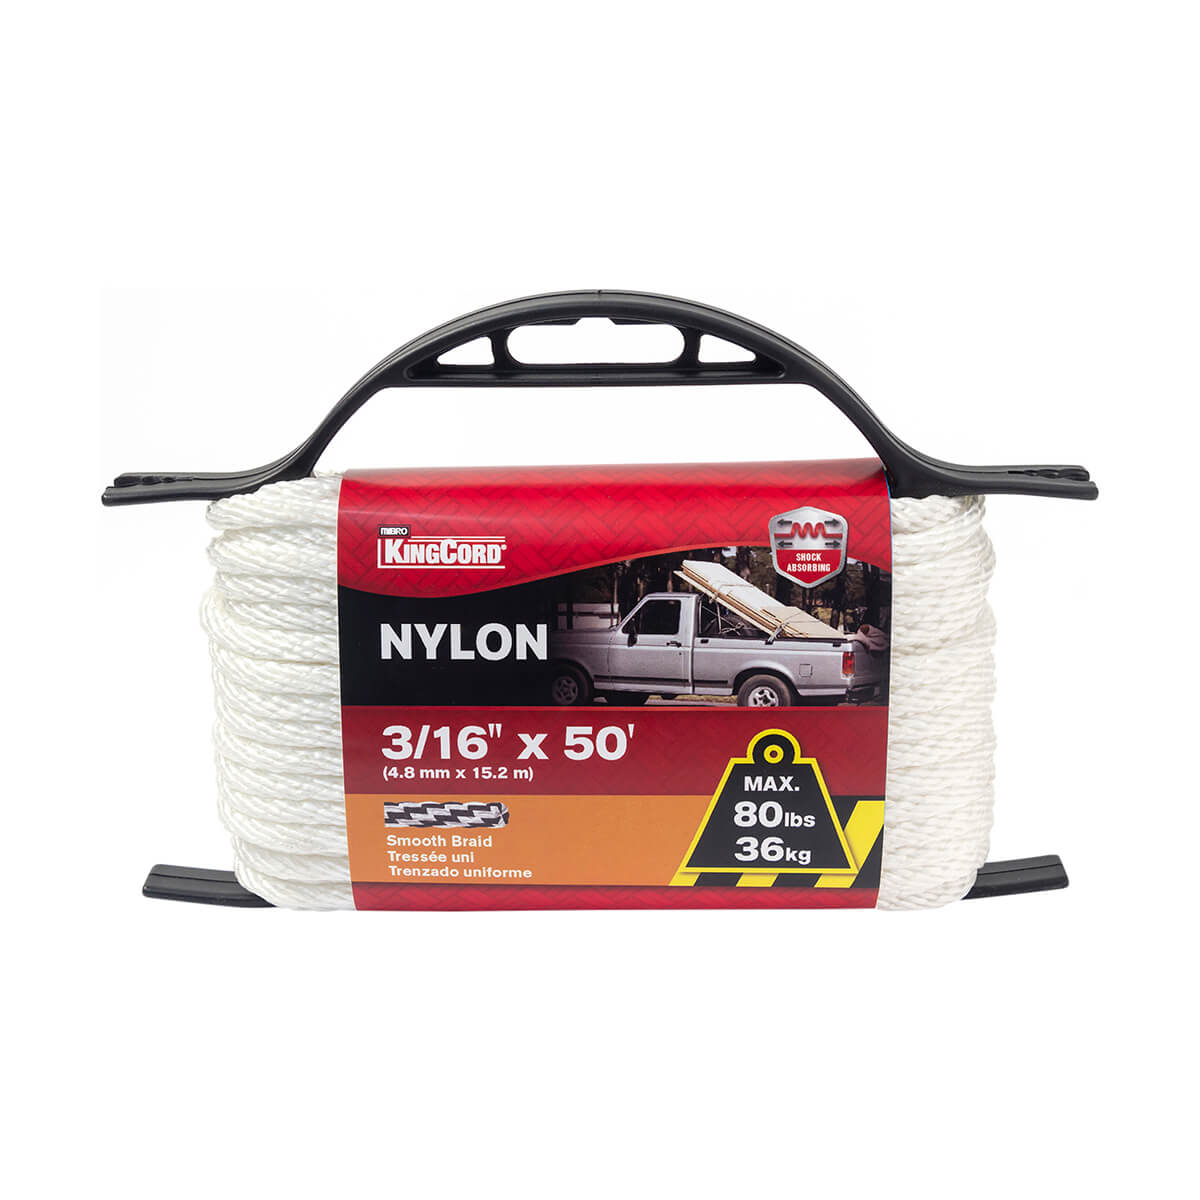 Nylon Smooth Braid Rope - 3/16-in x 50-ft